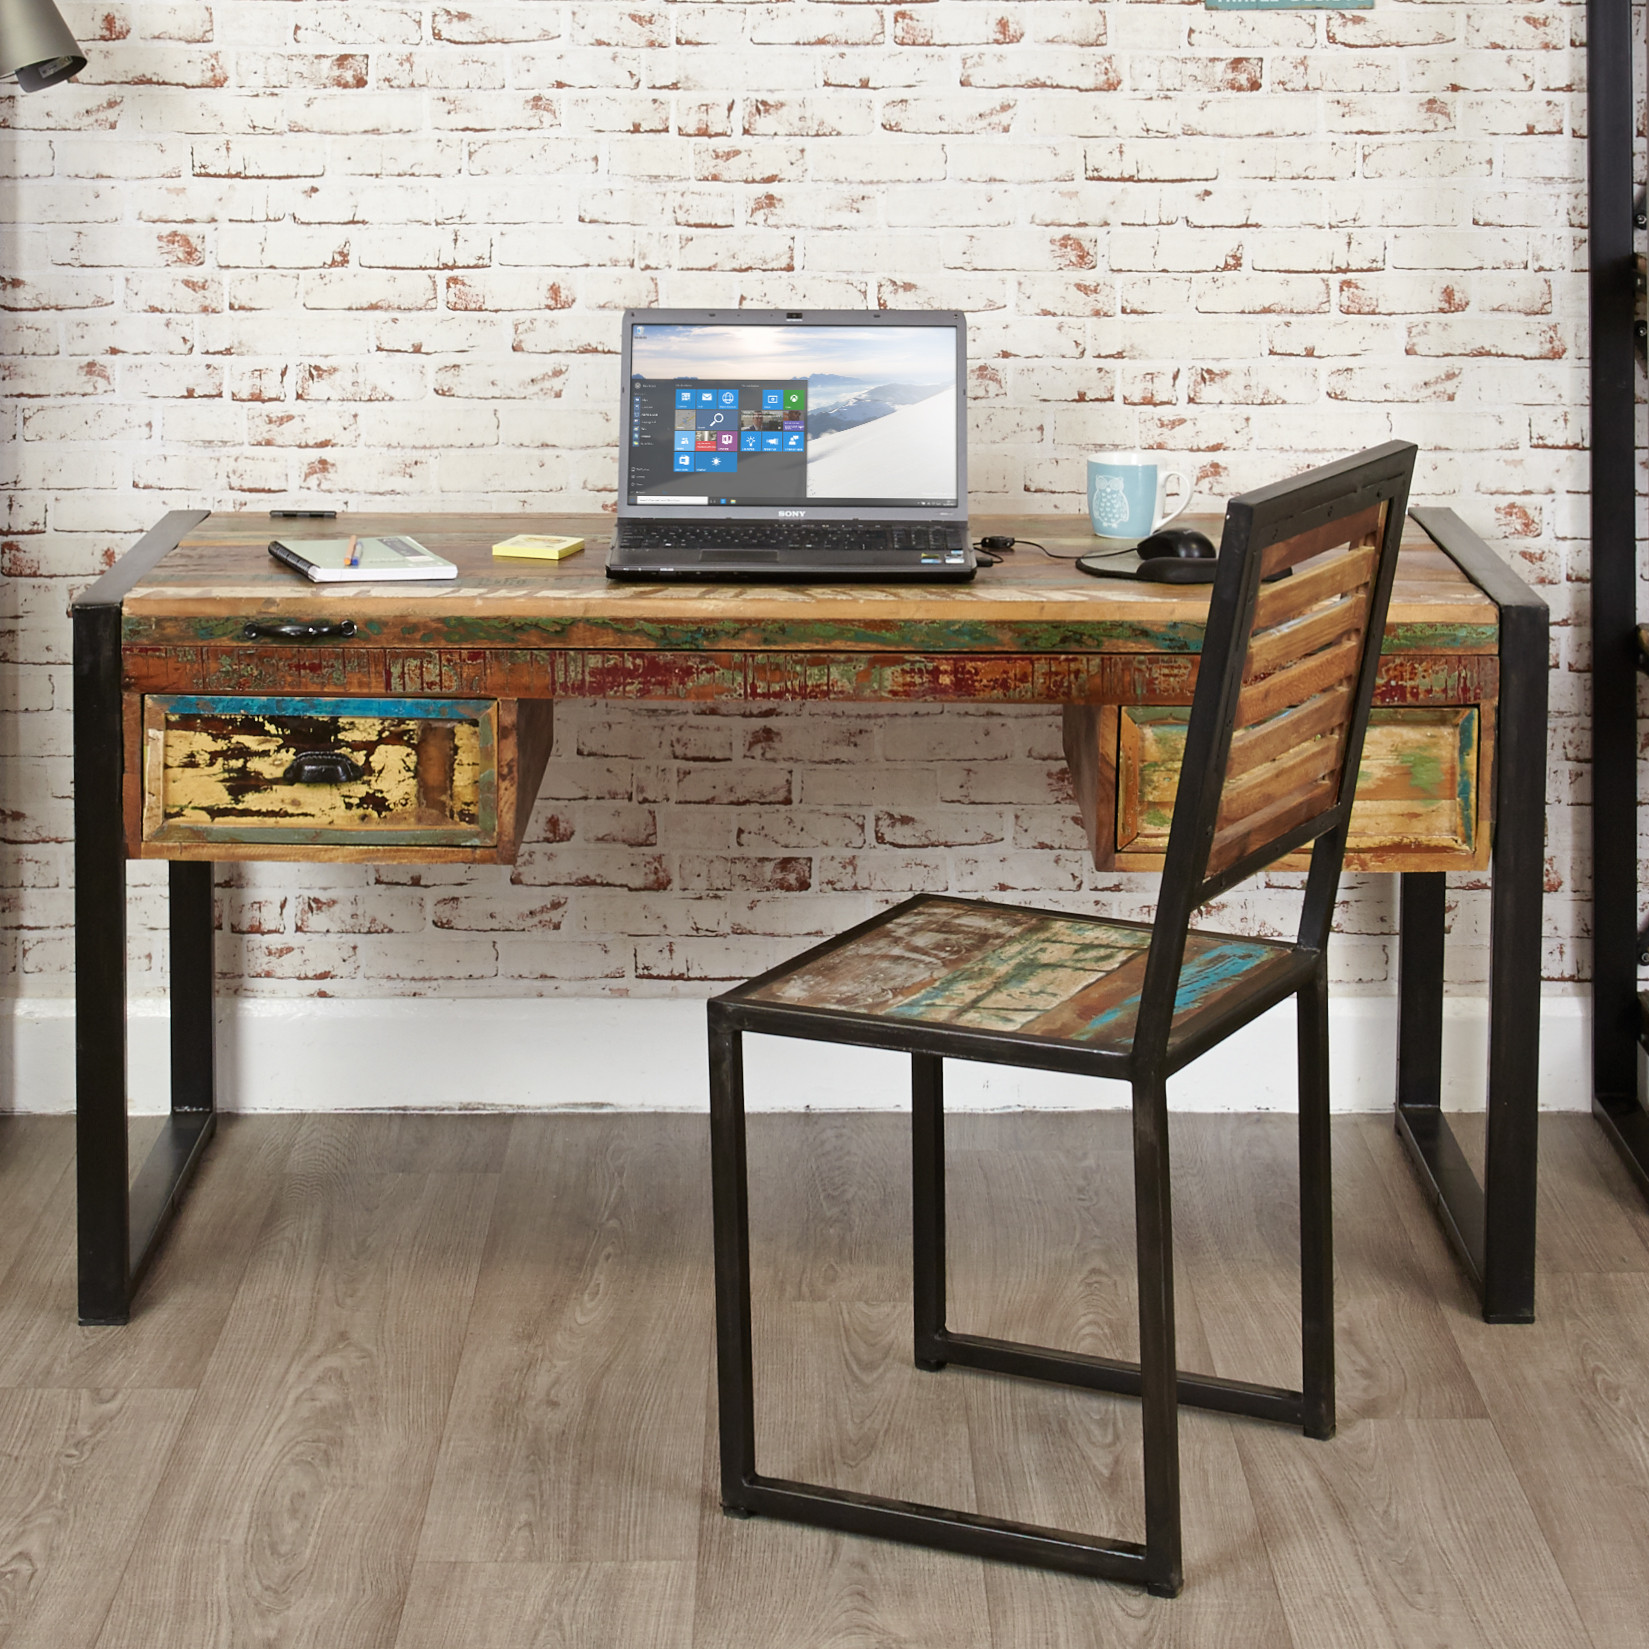 urban chic laptop desk or maybe a dressing table